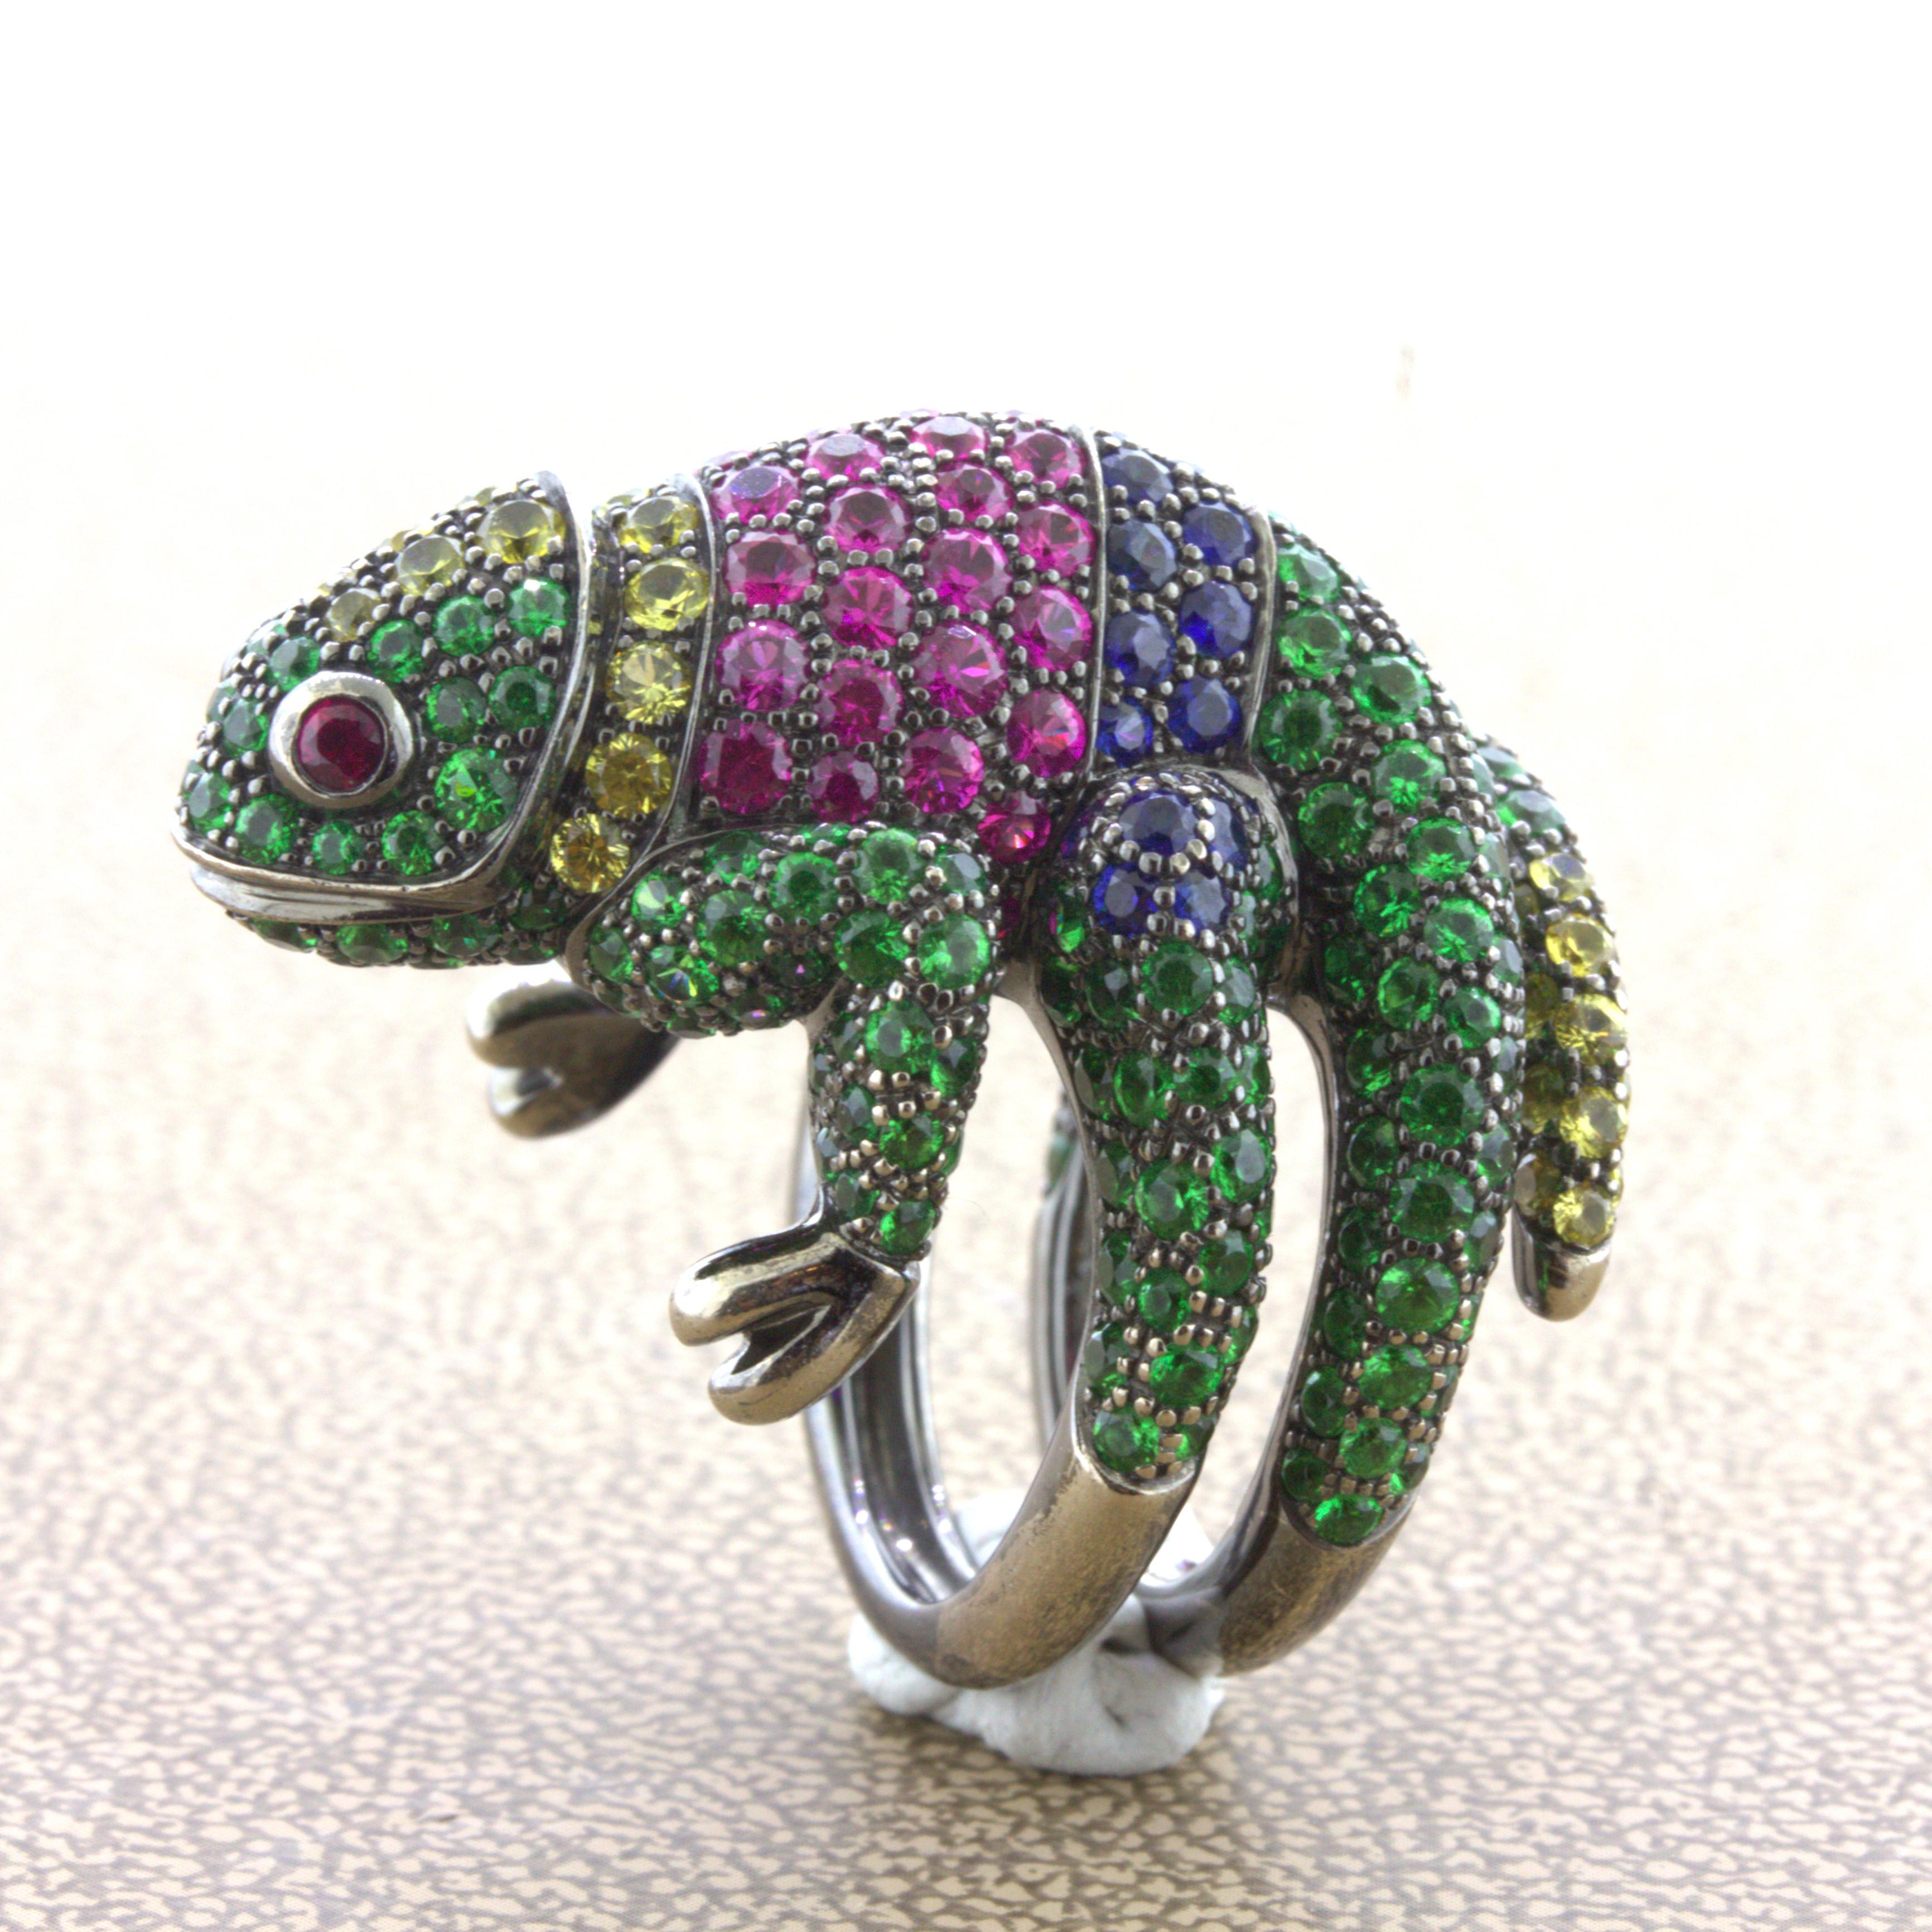 A rare and whimsical ring from Bucheron’s Animal Collection, this is Masy the Chameleon. It features an array of bright and vividly colored gemstones which include tsavorite, blue sapphire, yellow sapphire, pink sapphire, and ruby. Masy’s body is